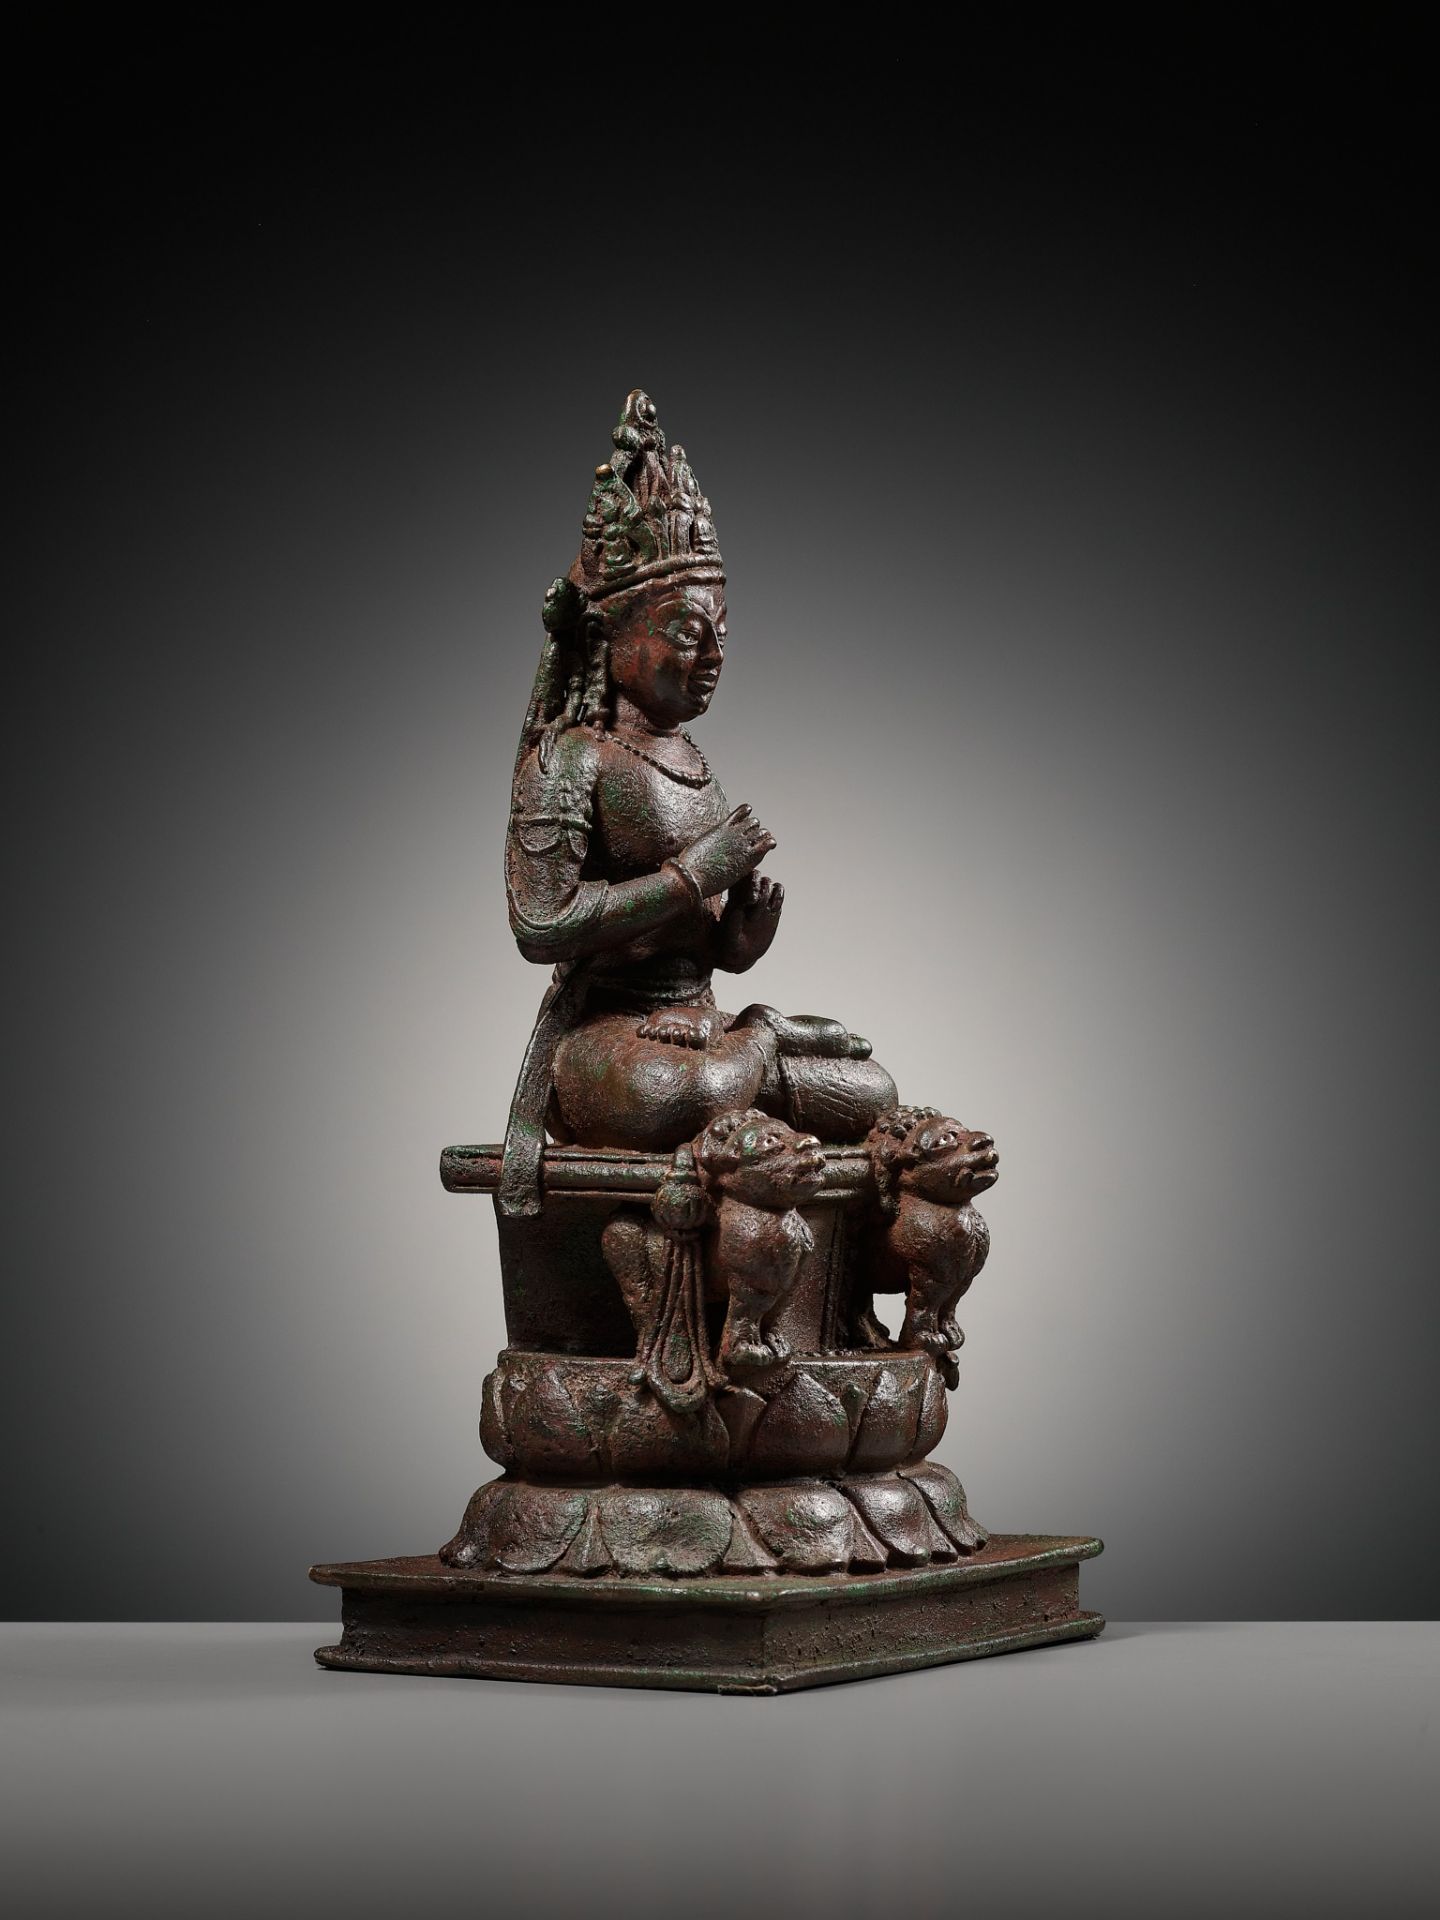 A SILVER-INLAID BRONZE FIGURE OF BUDDHA VAIROCANA, SWAT-VALLEY, 7TH-8TH CENTURY - Image 15 of 17